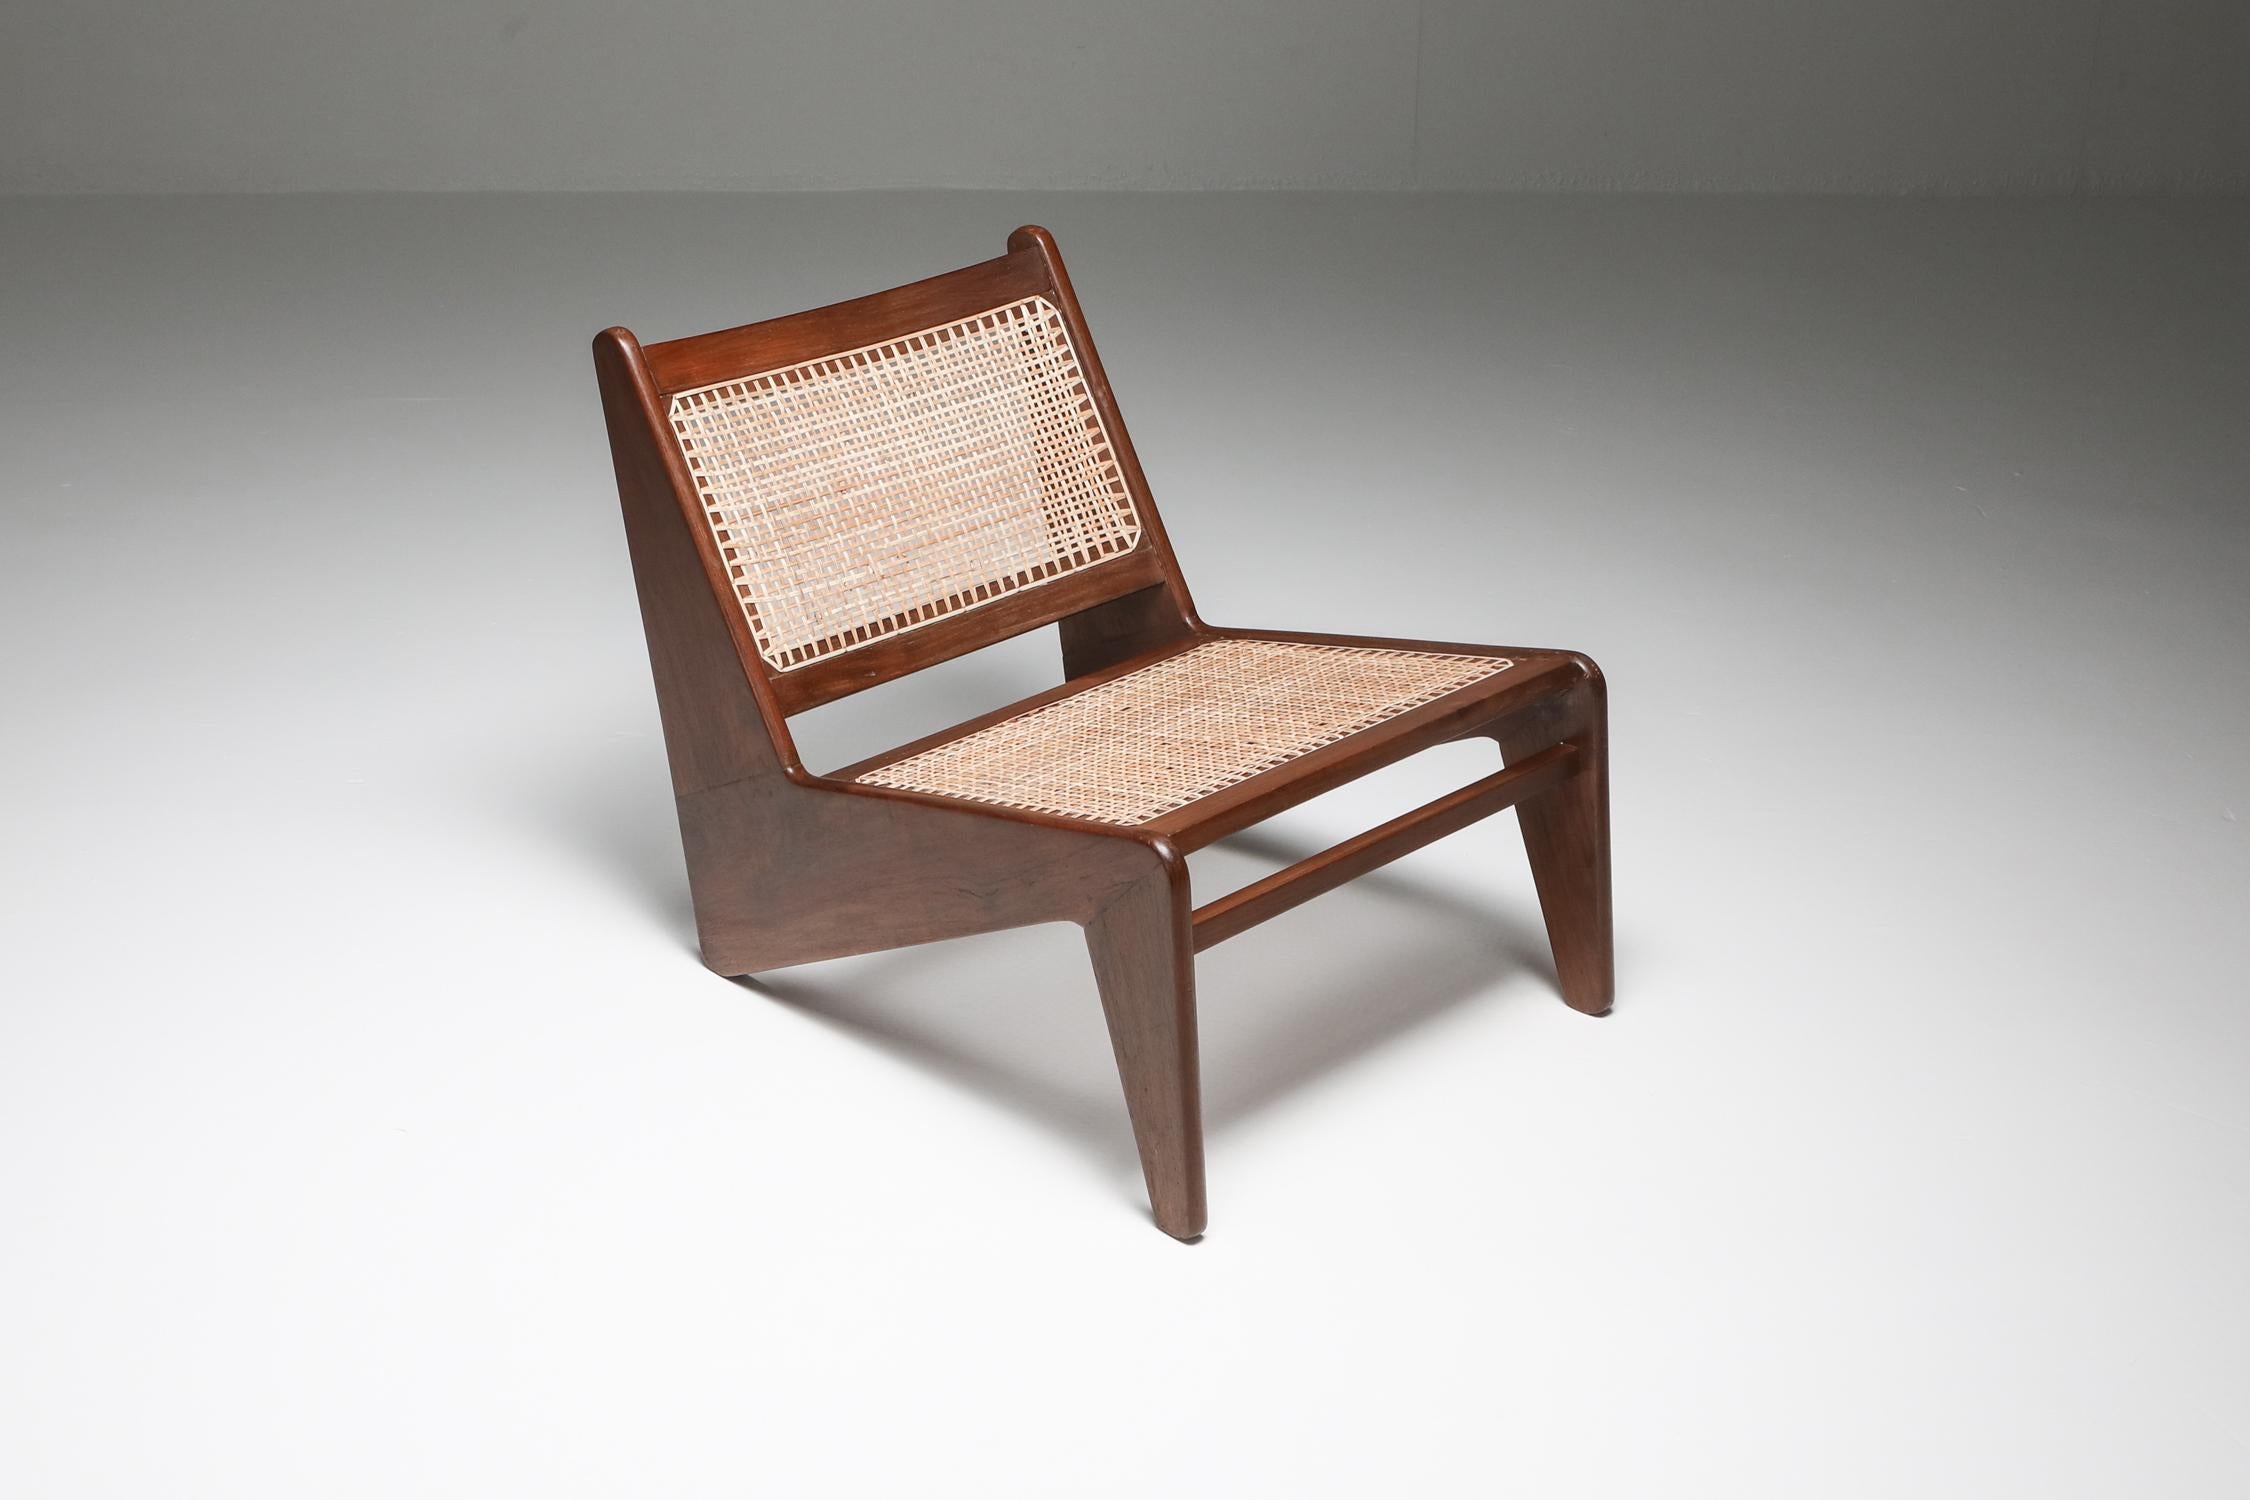 Mid-20th Century Kangaroo Chairs PJ-SI-59 by Pierre Jeanneret, Chandigarh, 1955 For Sale